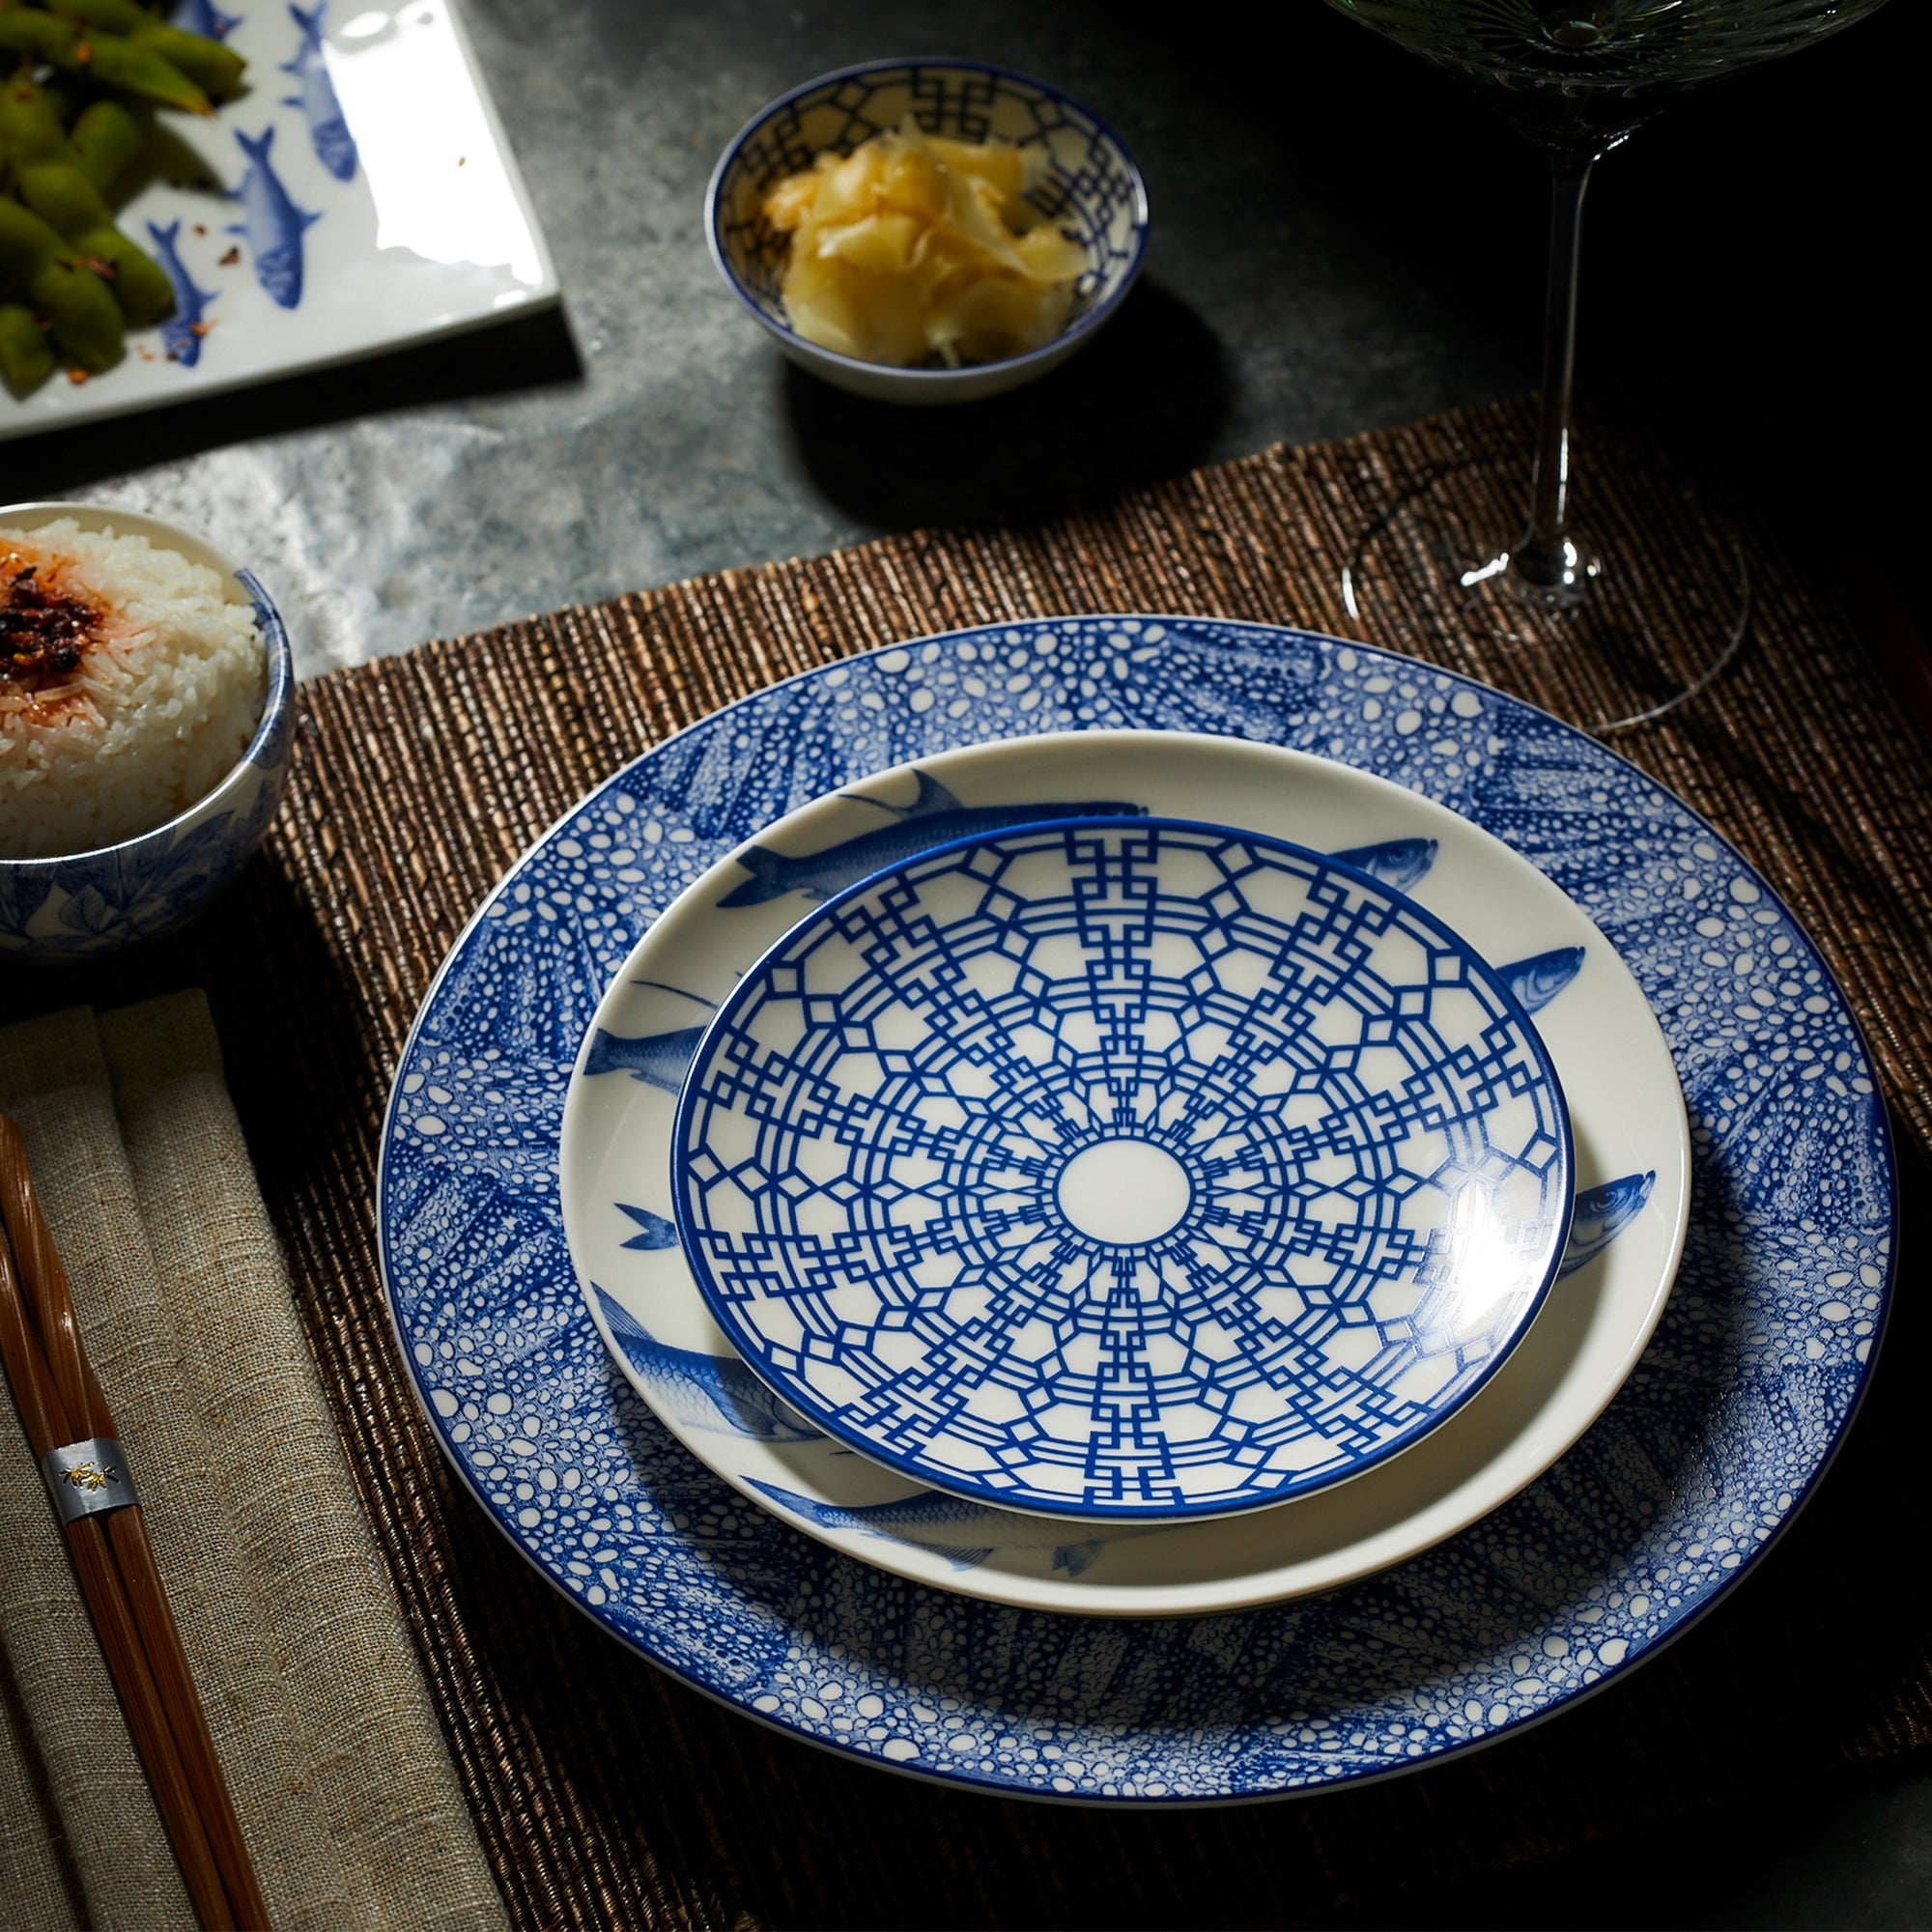 Four blue and white ceramic plates with intricate, interlocking lattice patterns, arranged overlapping each other in a fan shape. Perfect for any setting, these Newport Small Plates by Caskata Artisanal Home are crafted from premium porcelain inspired by the Newport Garden Gate design.